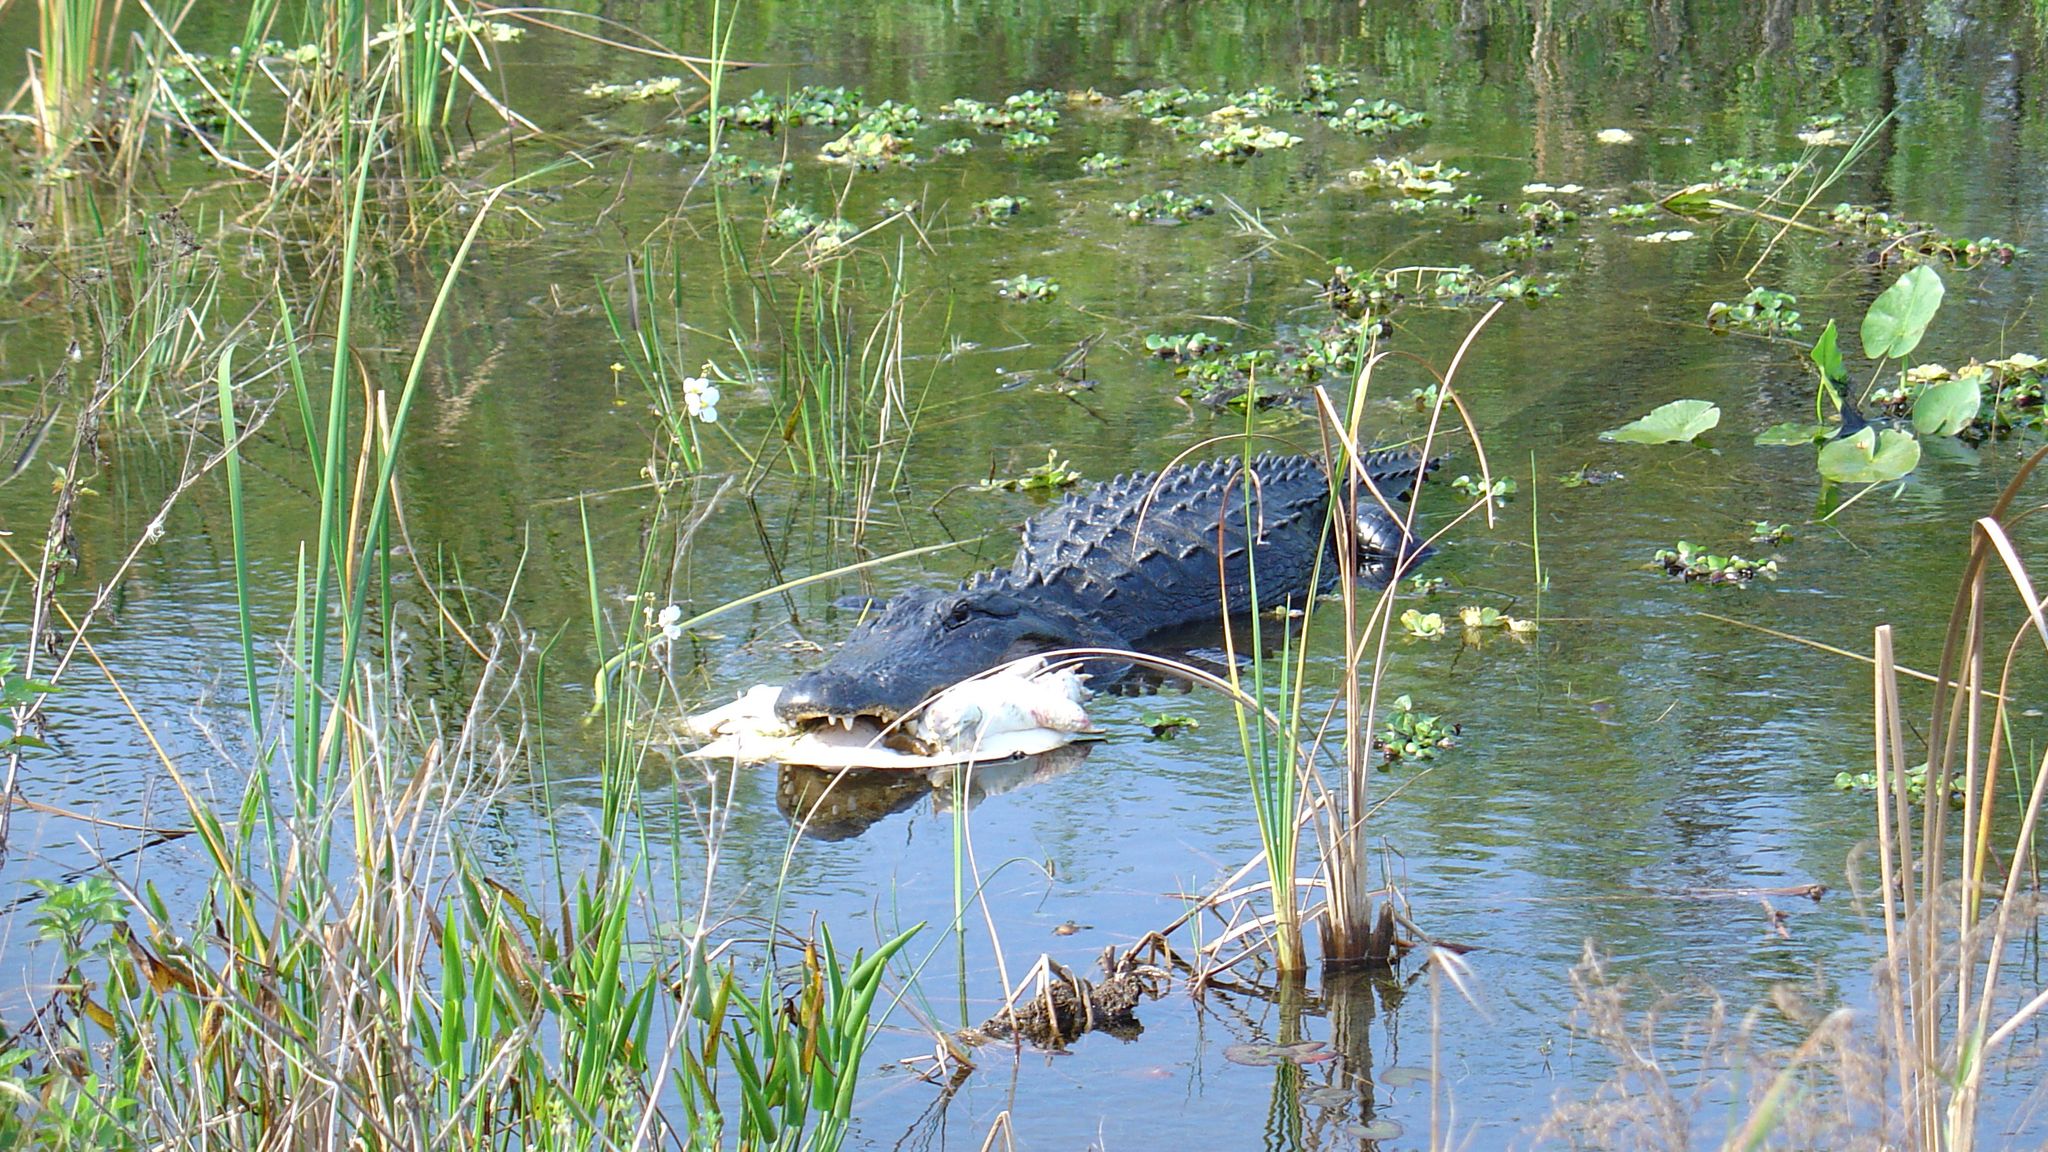 Woman, 85, killed by 11ft alligator while walking dog near canal in Florida